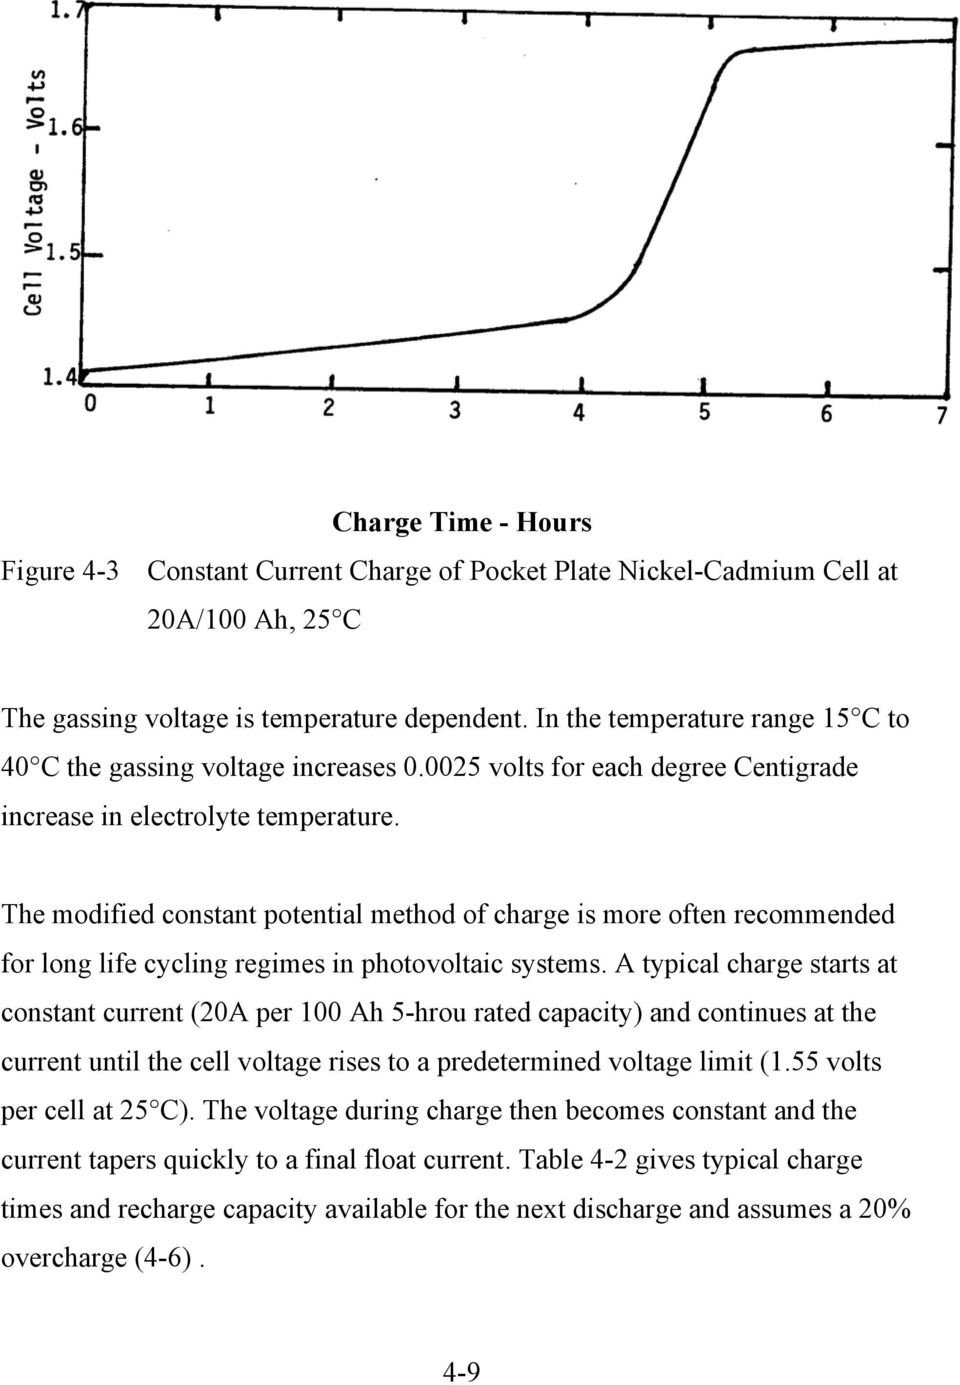 The modified constant potential method of charge is more often recommended for long life cycling regimes in photovoltaic systems.